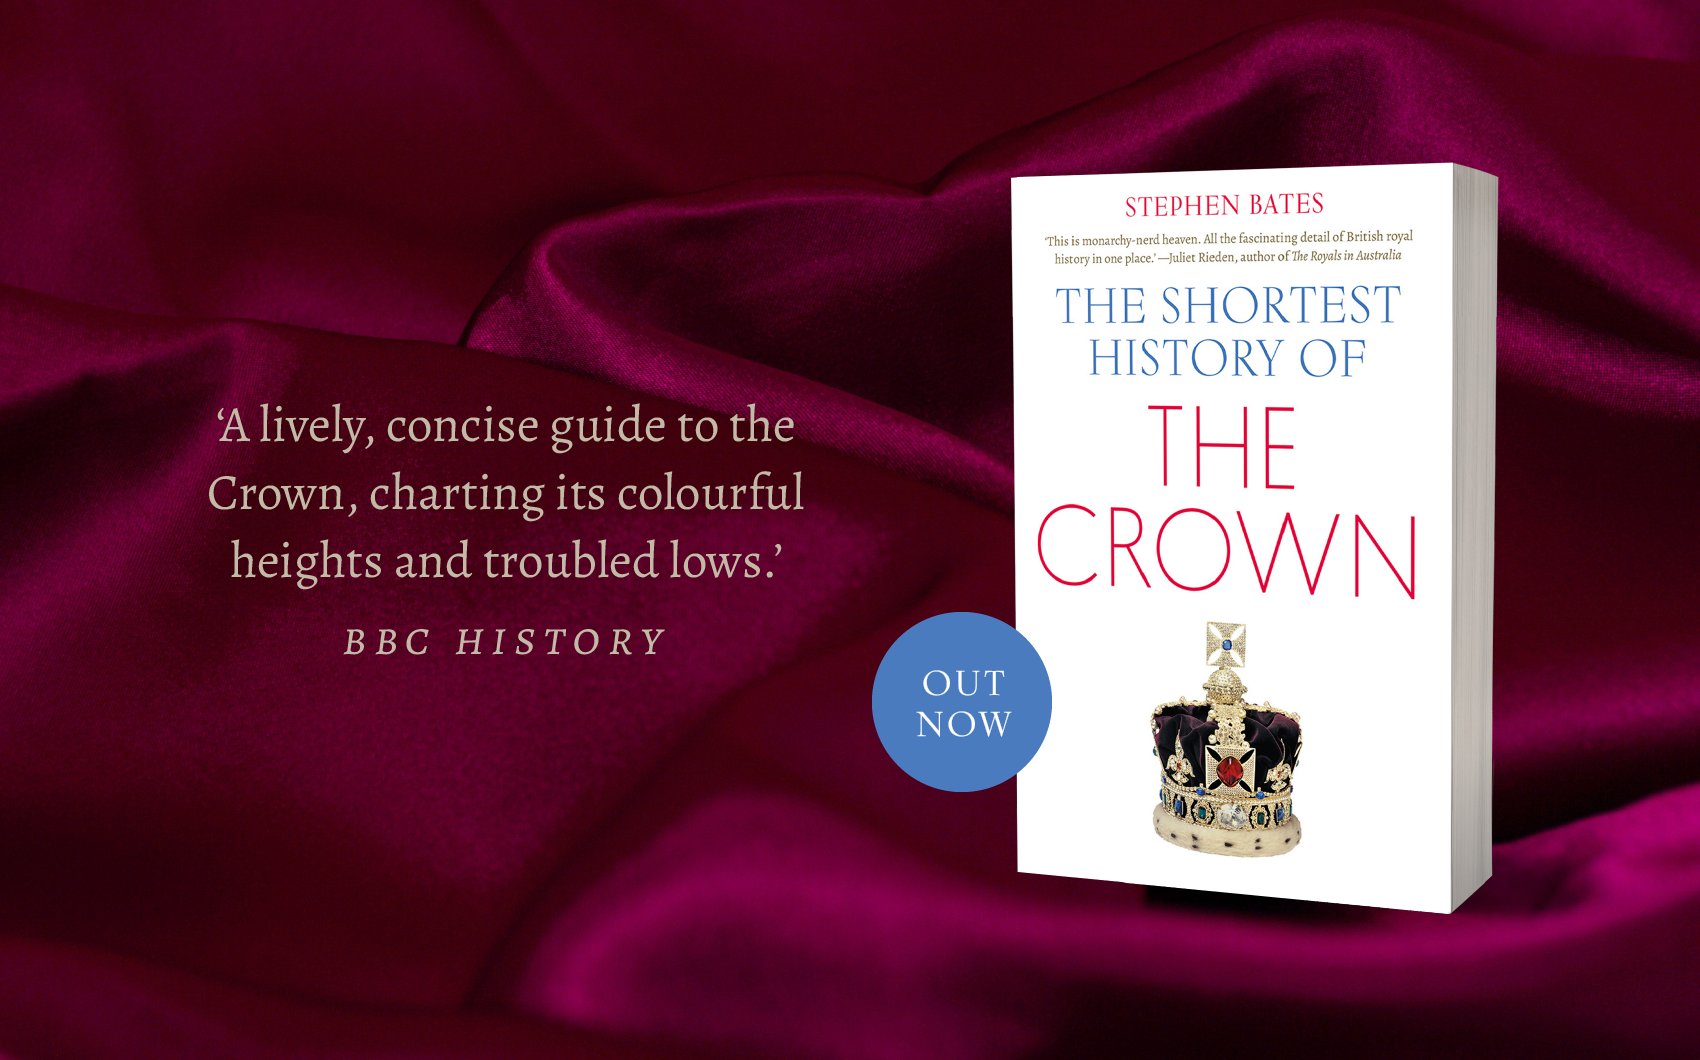 Out now: The Shortest History of the Crown